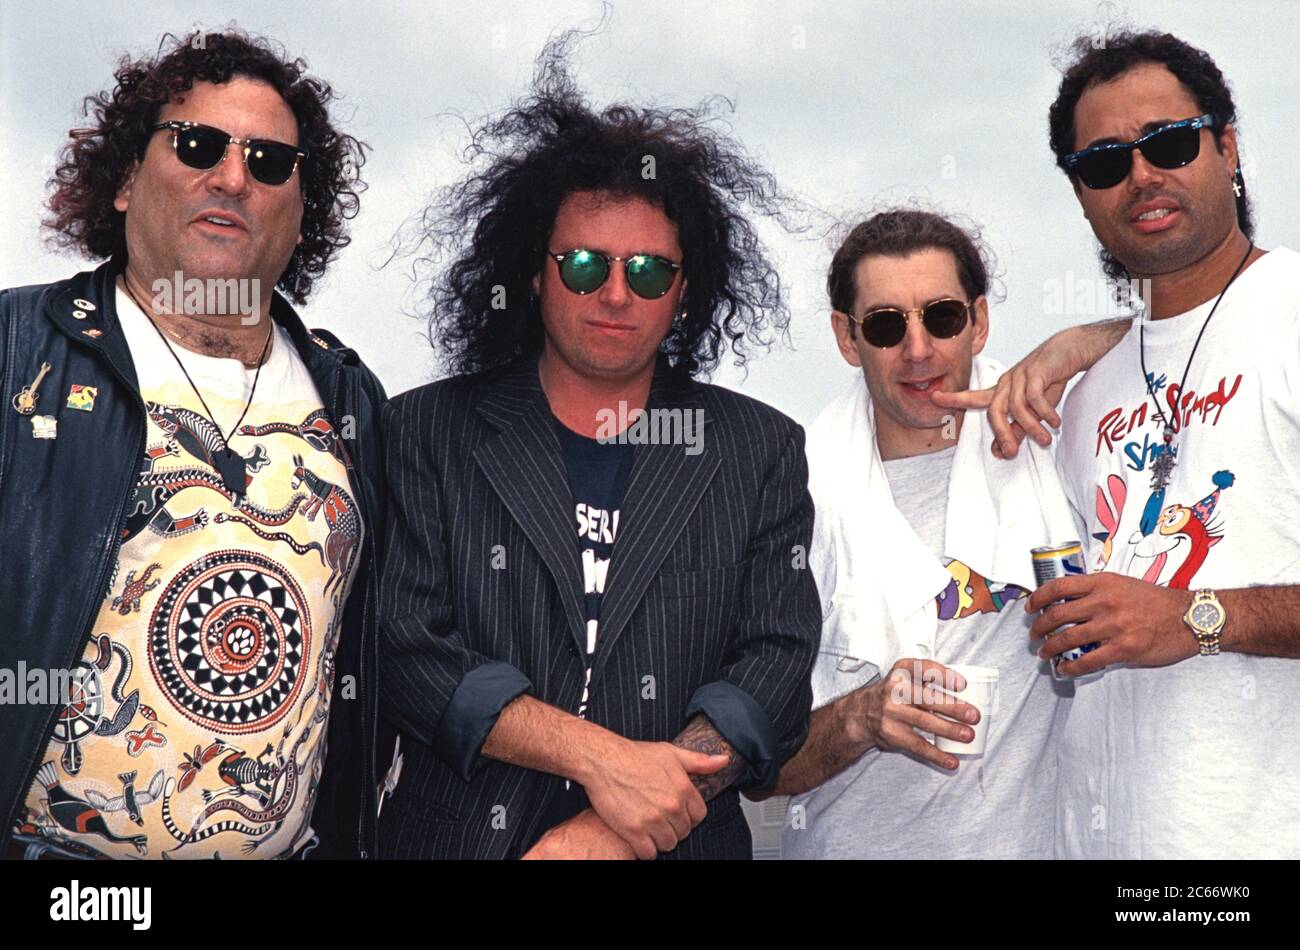 EXCLUSIVE - 06/12/1994, Jubek, backstage photo of the US rock band Los Lobotomys with David Garfield (Keys), Steve Lukather (guitar and vocals), Simon Phillips (drums), John Pêna (bass), (left to right) - backstage at Jubek Open Air Festival 1994. The solo project Los Lobotomys by toto guitarist Steve Lukather played some concerts in Germany in 1994 and promoted dawith the album Candyman. David Garfield and Steve Lukather were founding members of Los Lobotomys. | usage worldwide Stock Photo